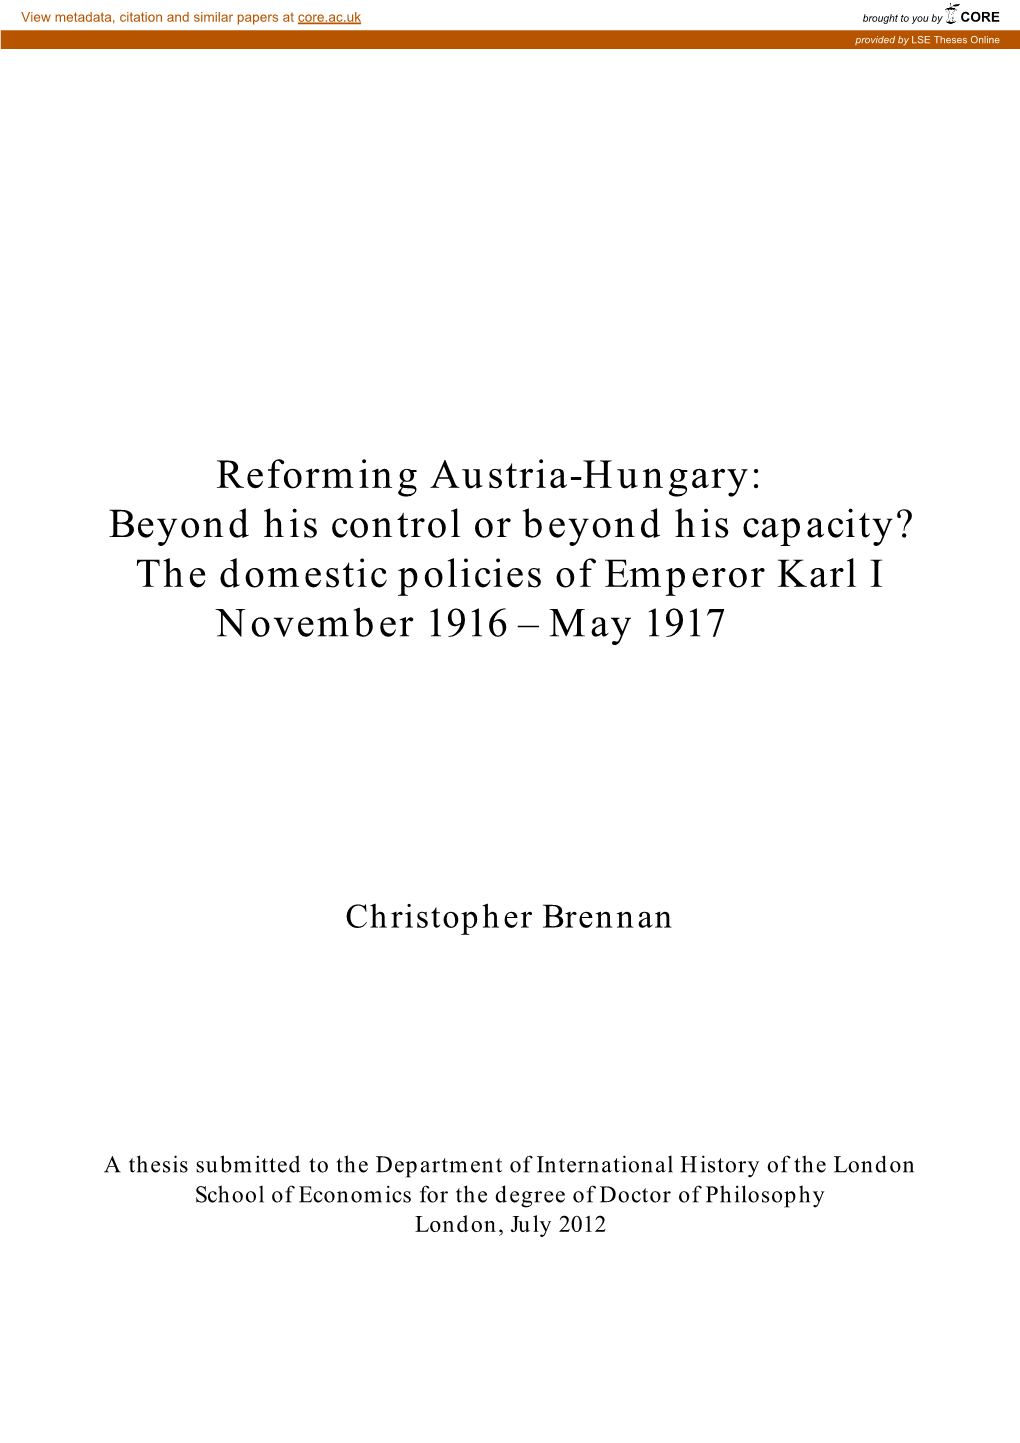 Reforming Austria-Hungary: Beyond His Control Or Beyond His Capacity? the Domestic Policies of Emperor Karl I November 1916 – May 1917